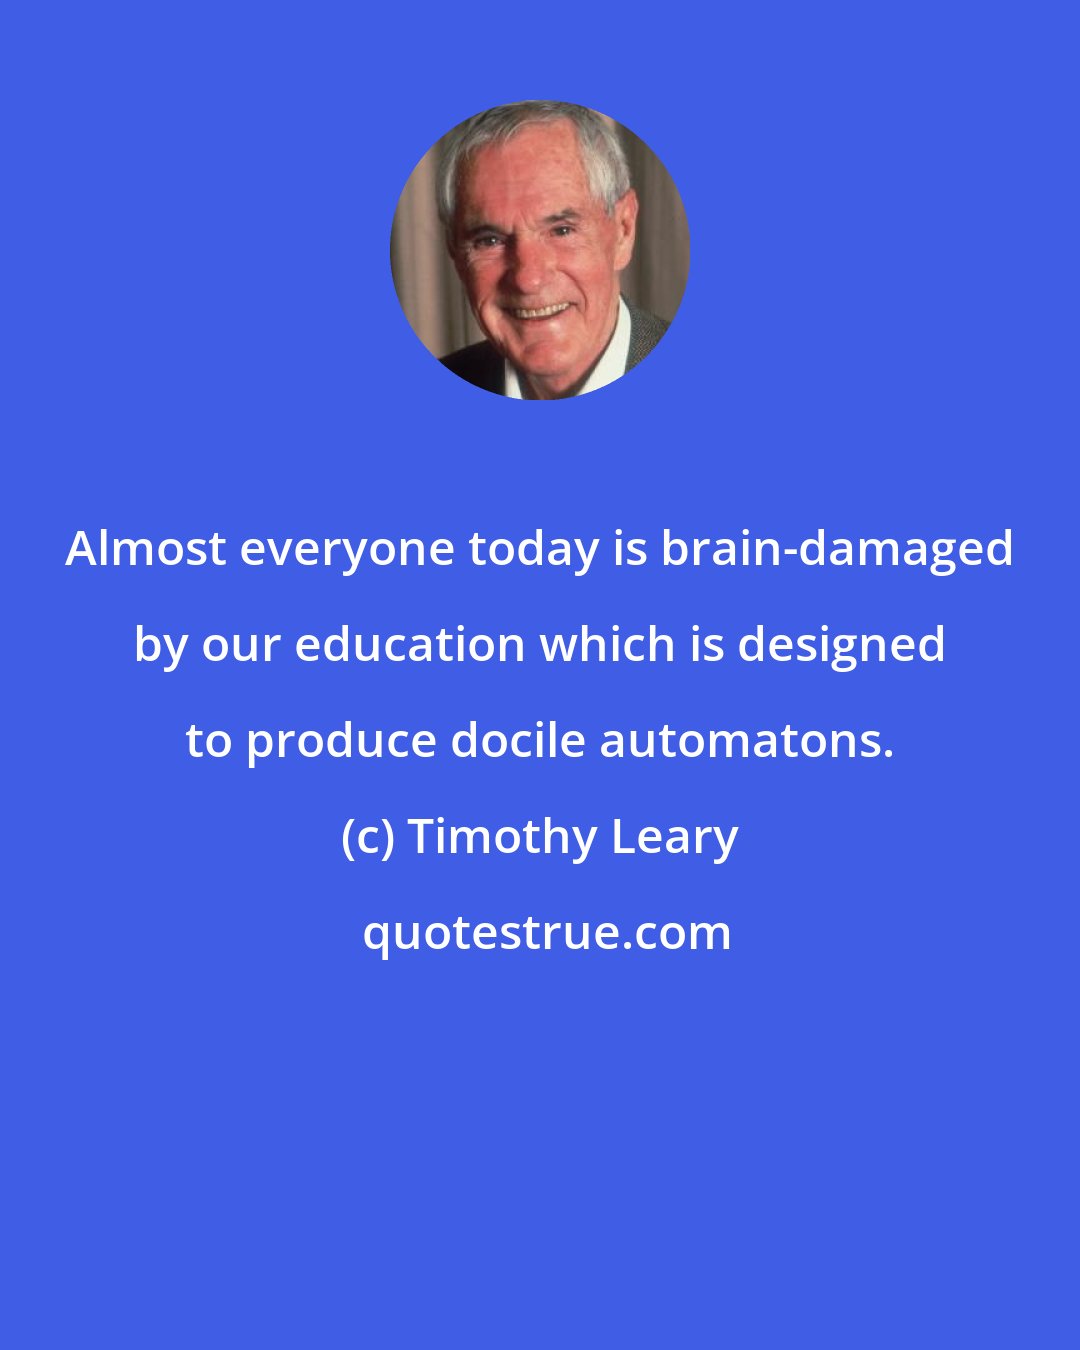 Timothy Leary: Almost everyone today is brain-damaged by our education which is designed to produce docile automatons.